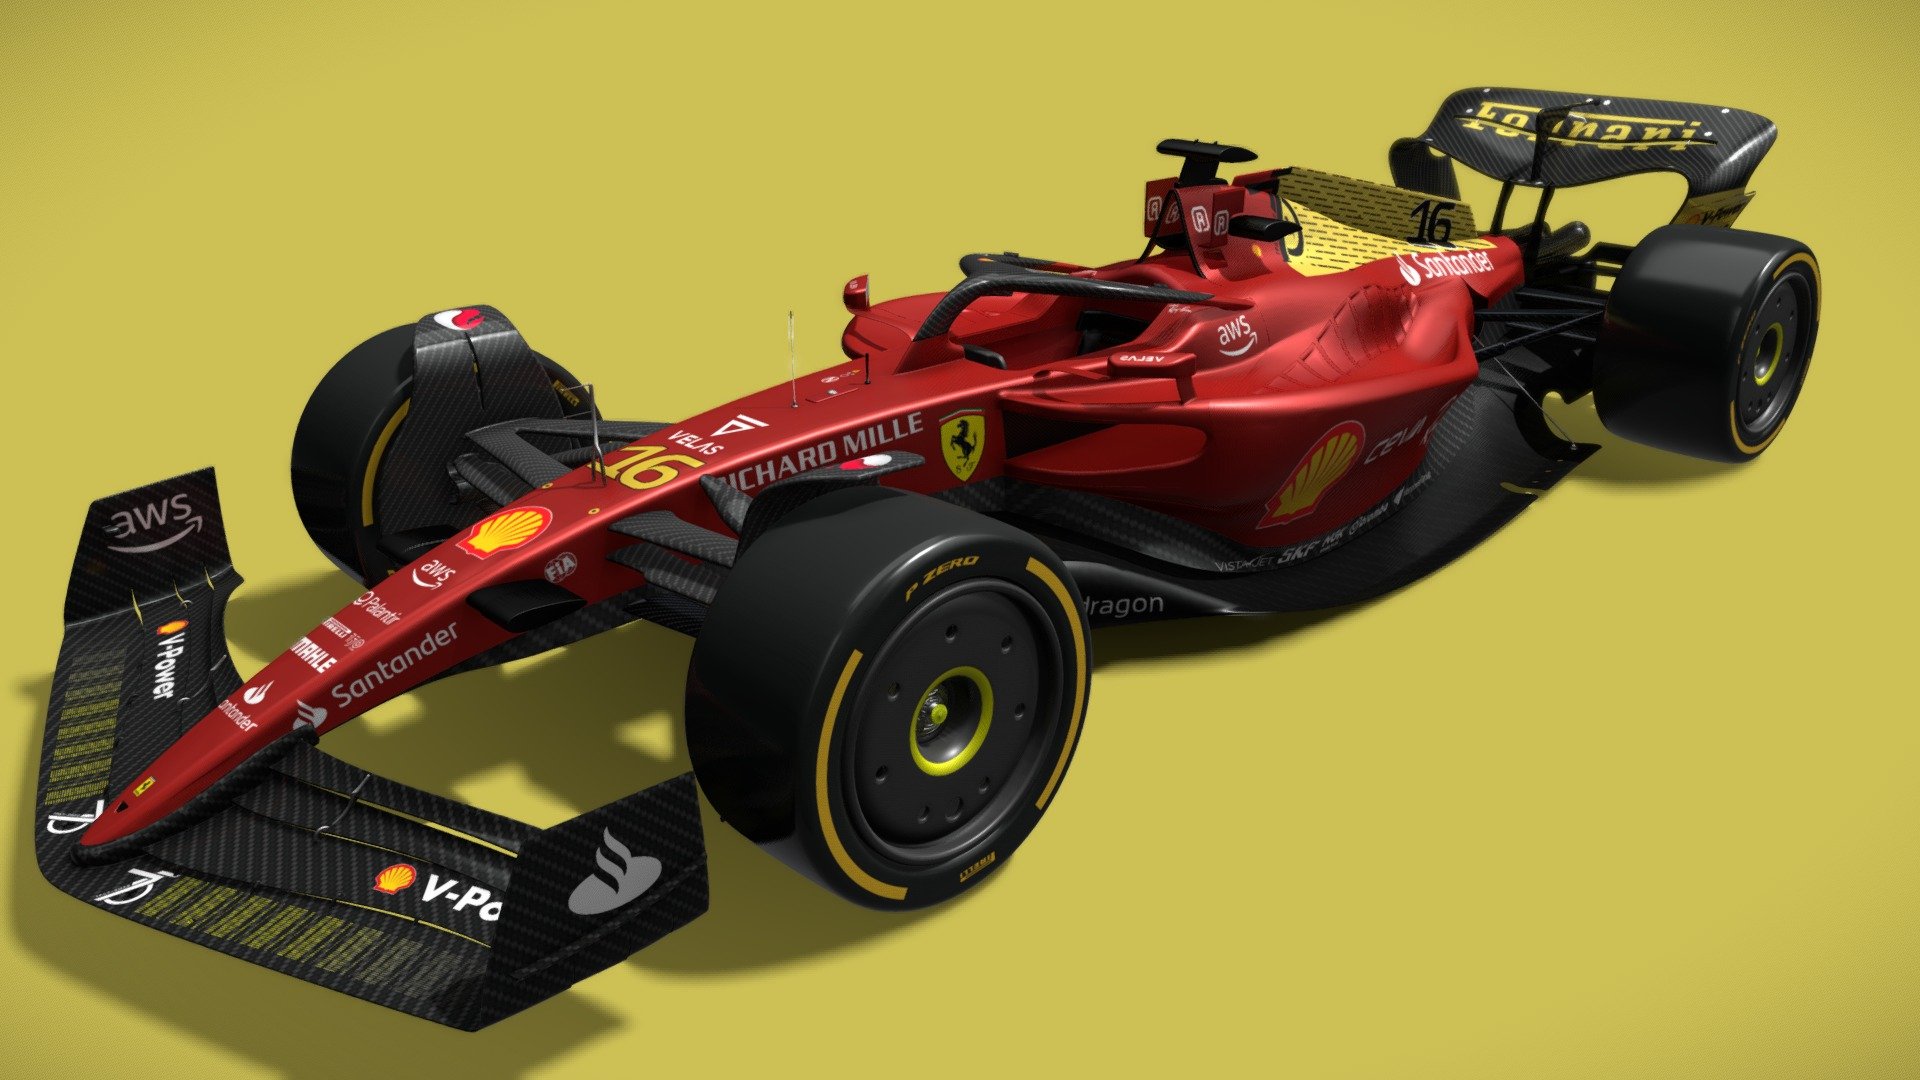 Ferrari F1-75 Modena yellow livery edition, on occasion of the 75th anniversary of the Maranello team.
The car was shown during the 100th anniversary of the Italian F1 Gran Prix in Monza 2022.
The model is created in Solidworks and textured in Blender 3d model